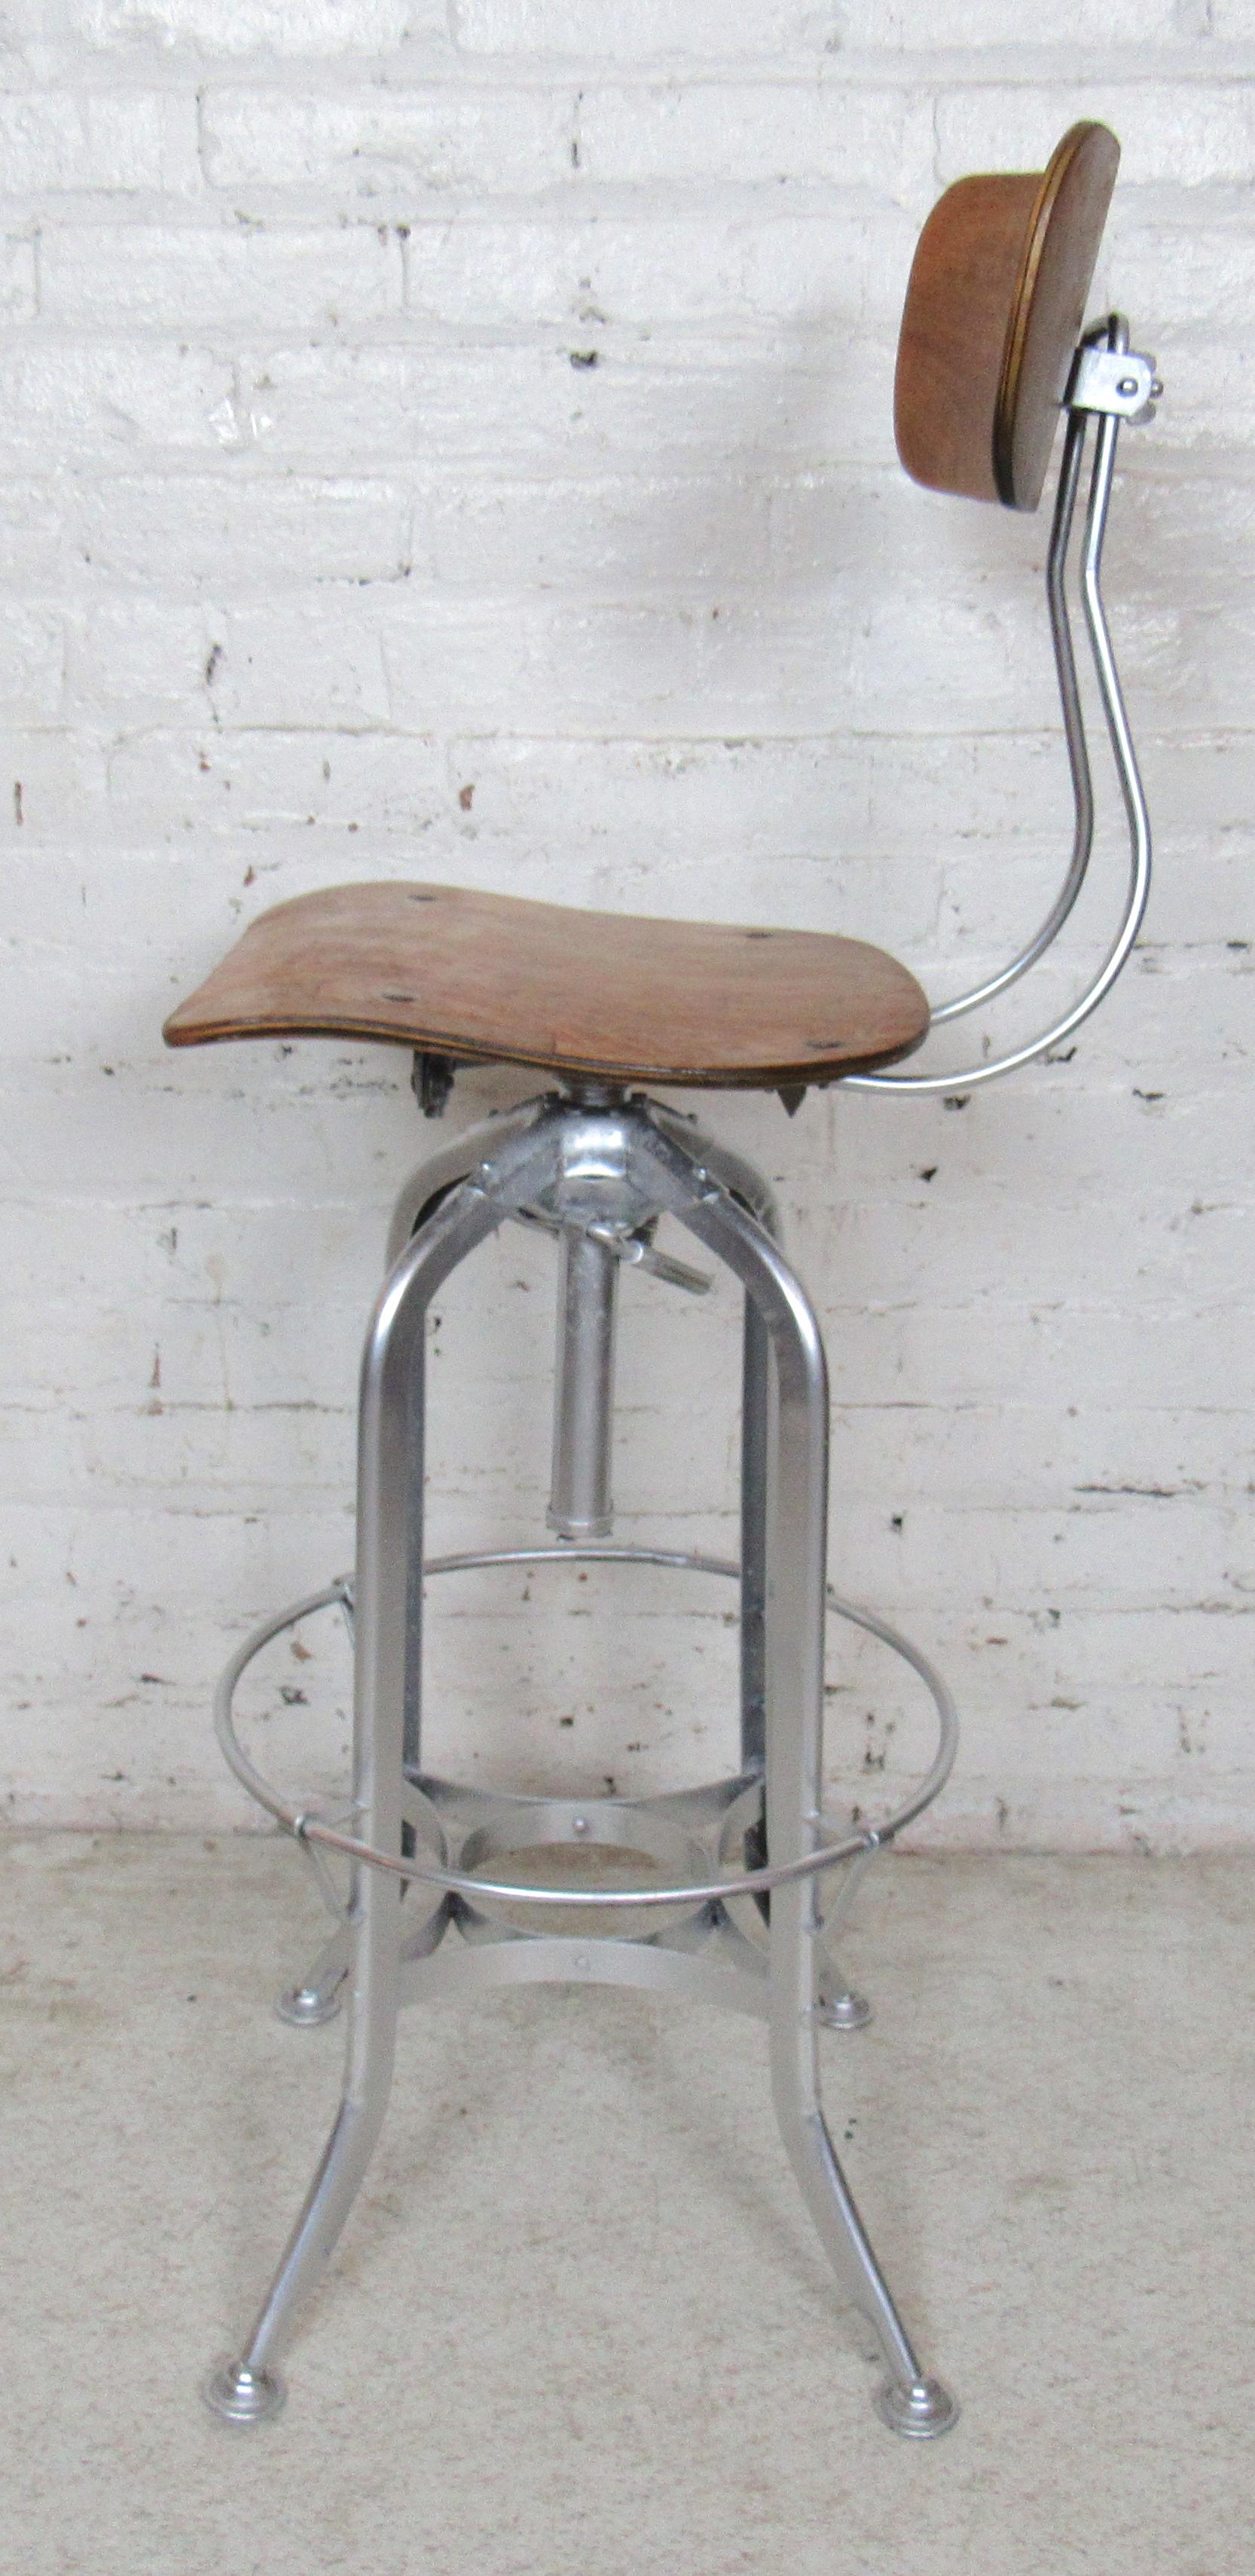 Vintage drafting stool with bentwood seat and back and iron base.
(Please confirm item location - NY or NJ - with dealer).
 